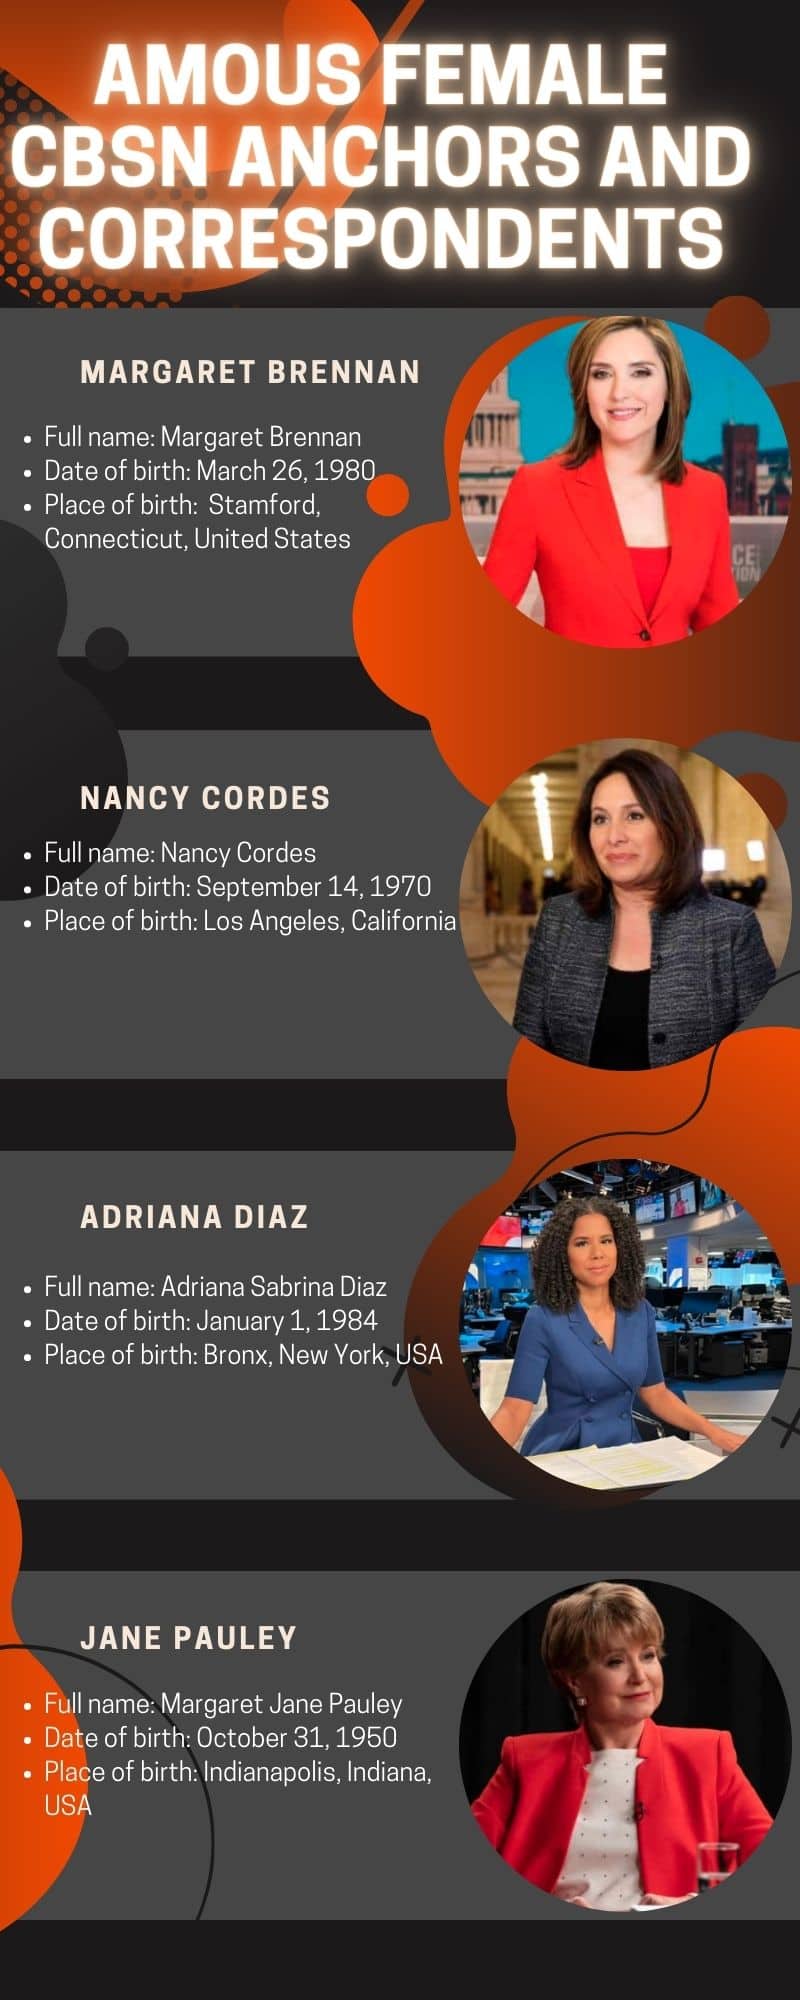 Famous female CBSN anchors and correspondents